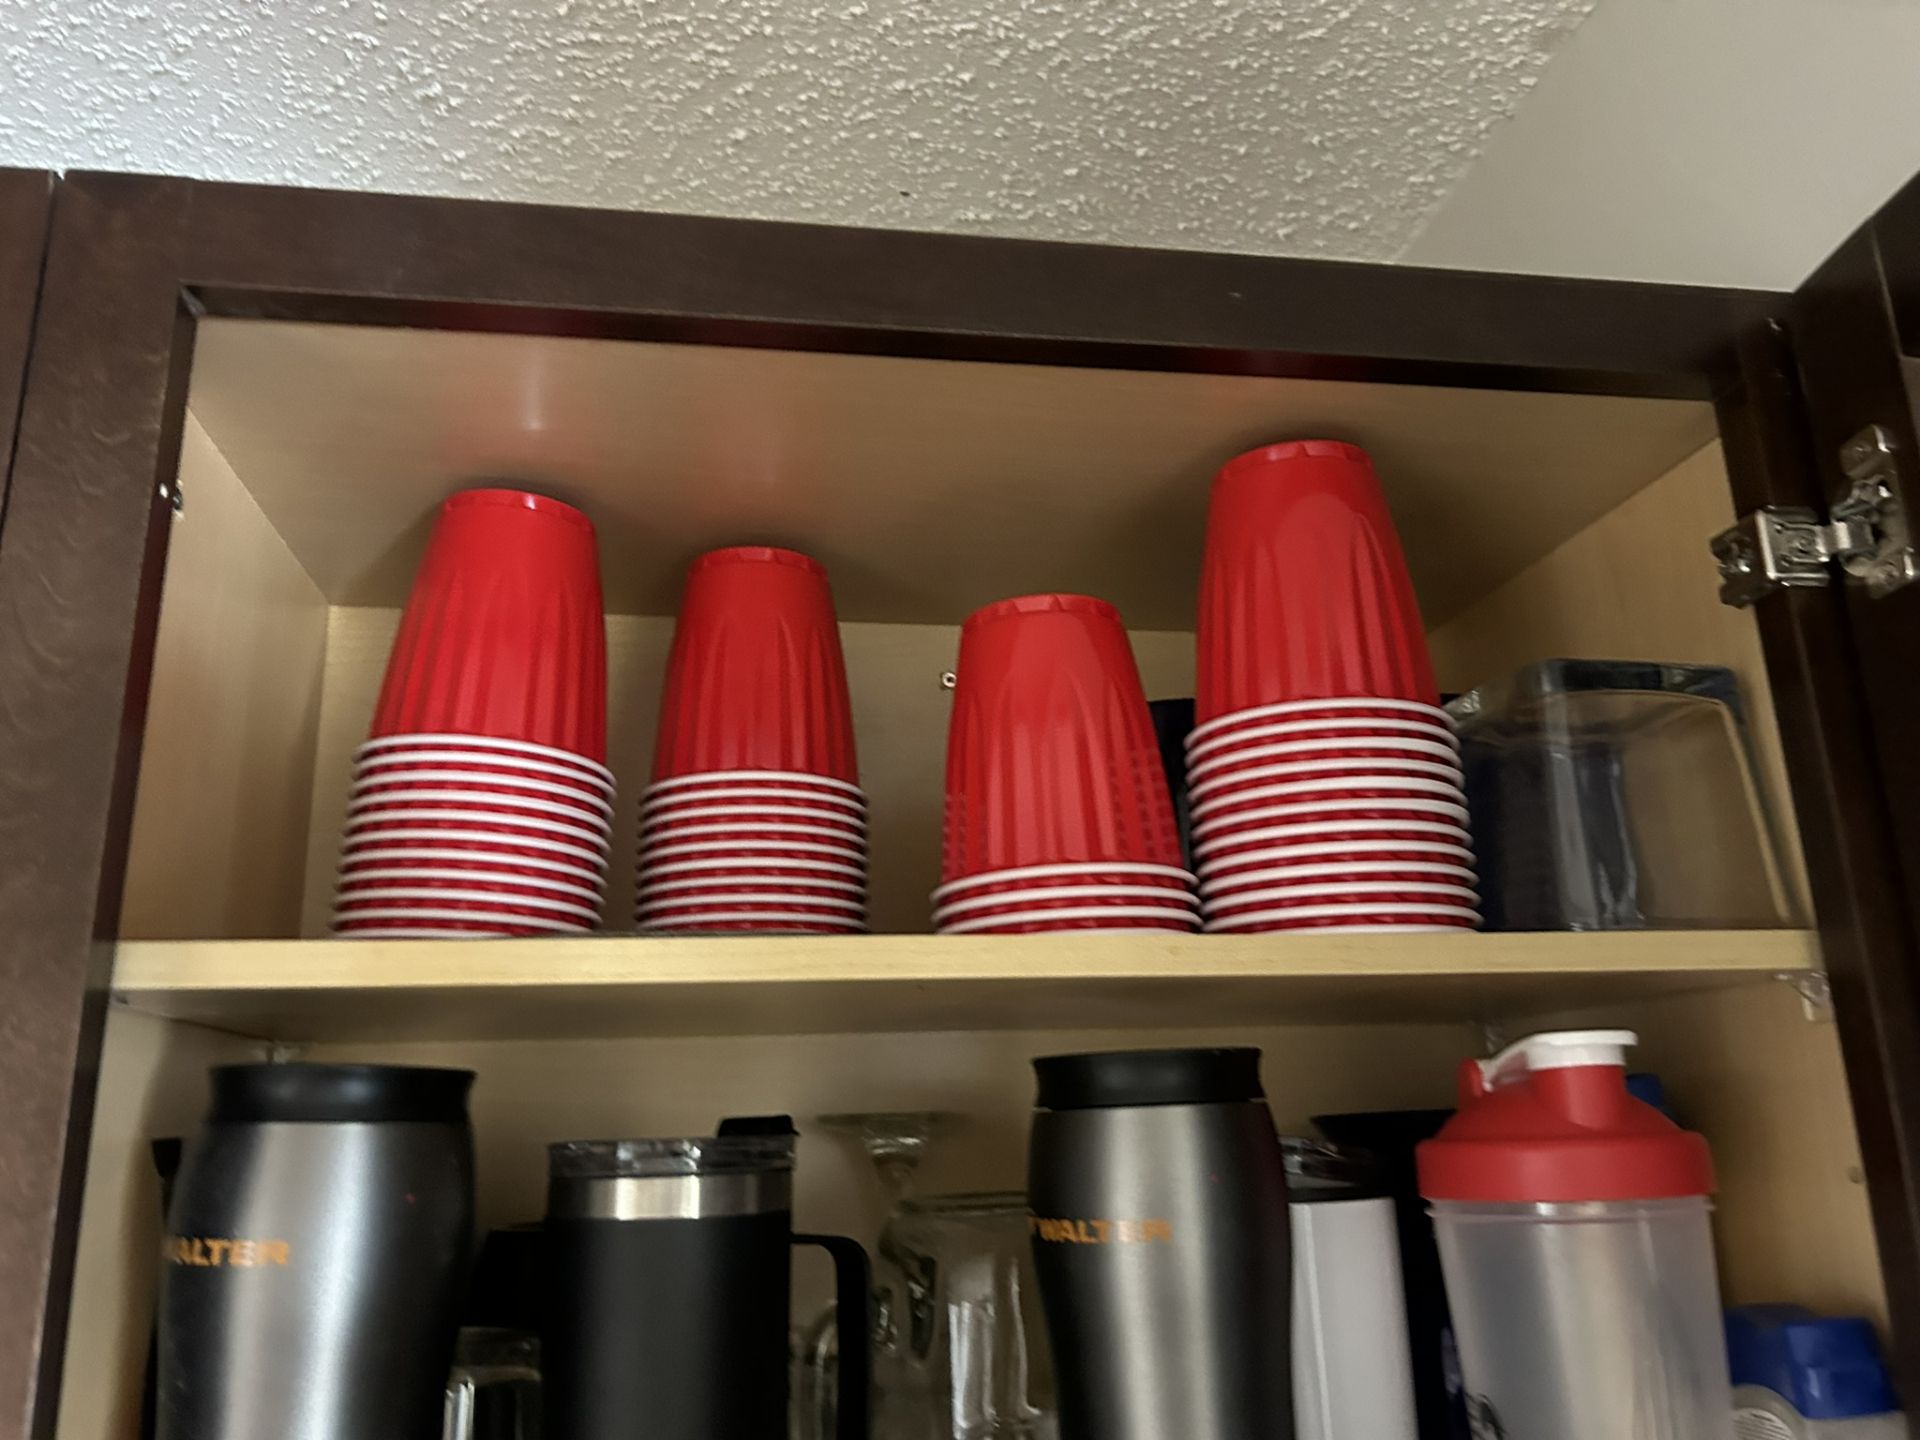 L/O ASSORTED GLASSES, INSULATED TRAVEL MUGS, CUPS, ETC. - Image 7 of 7